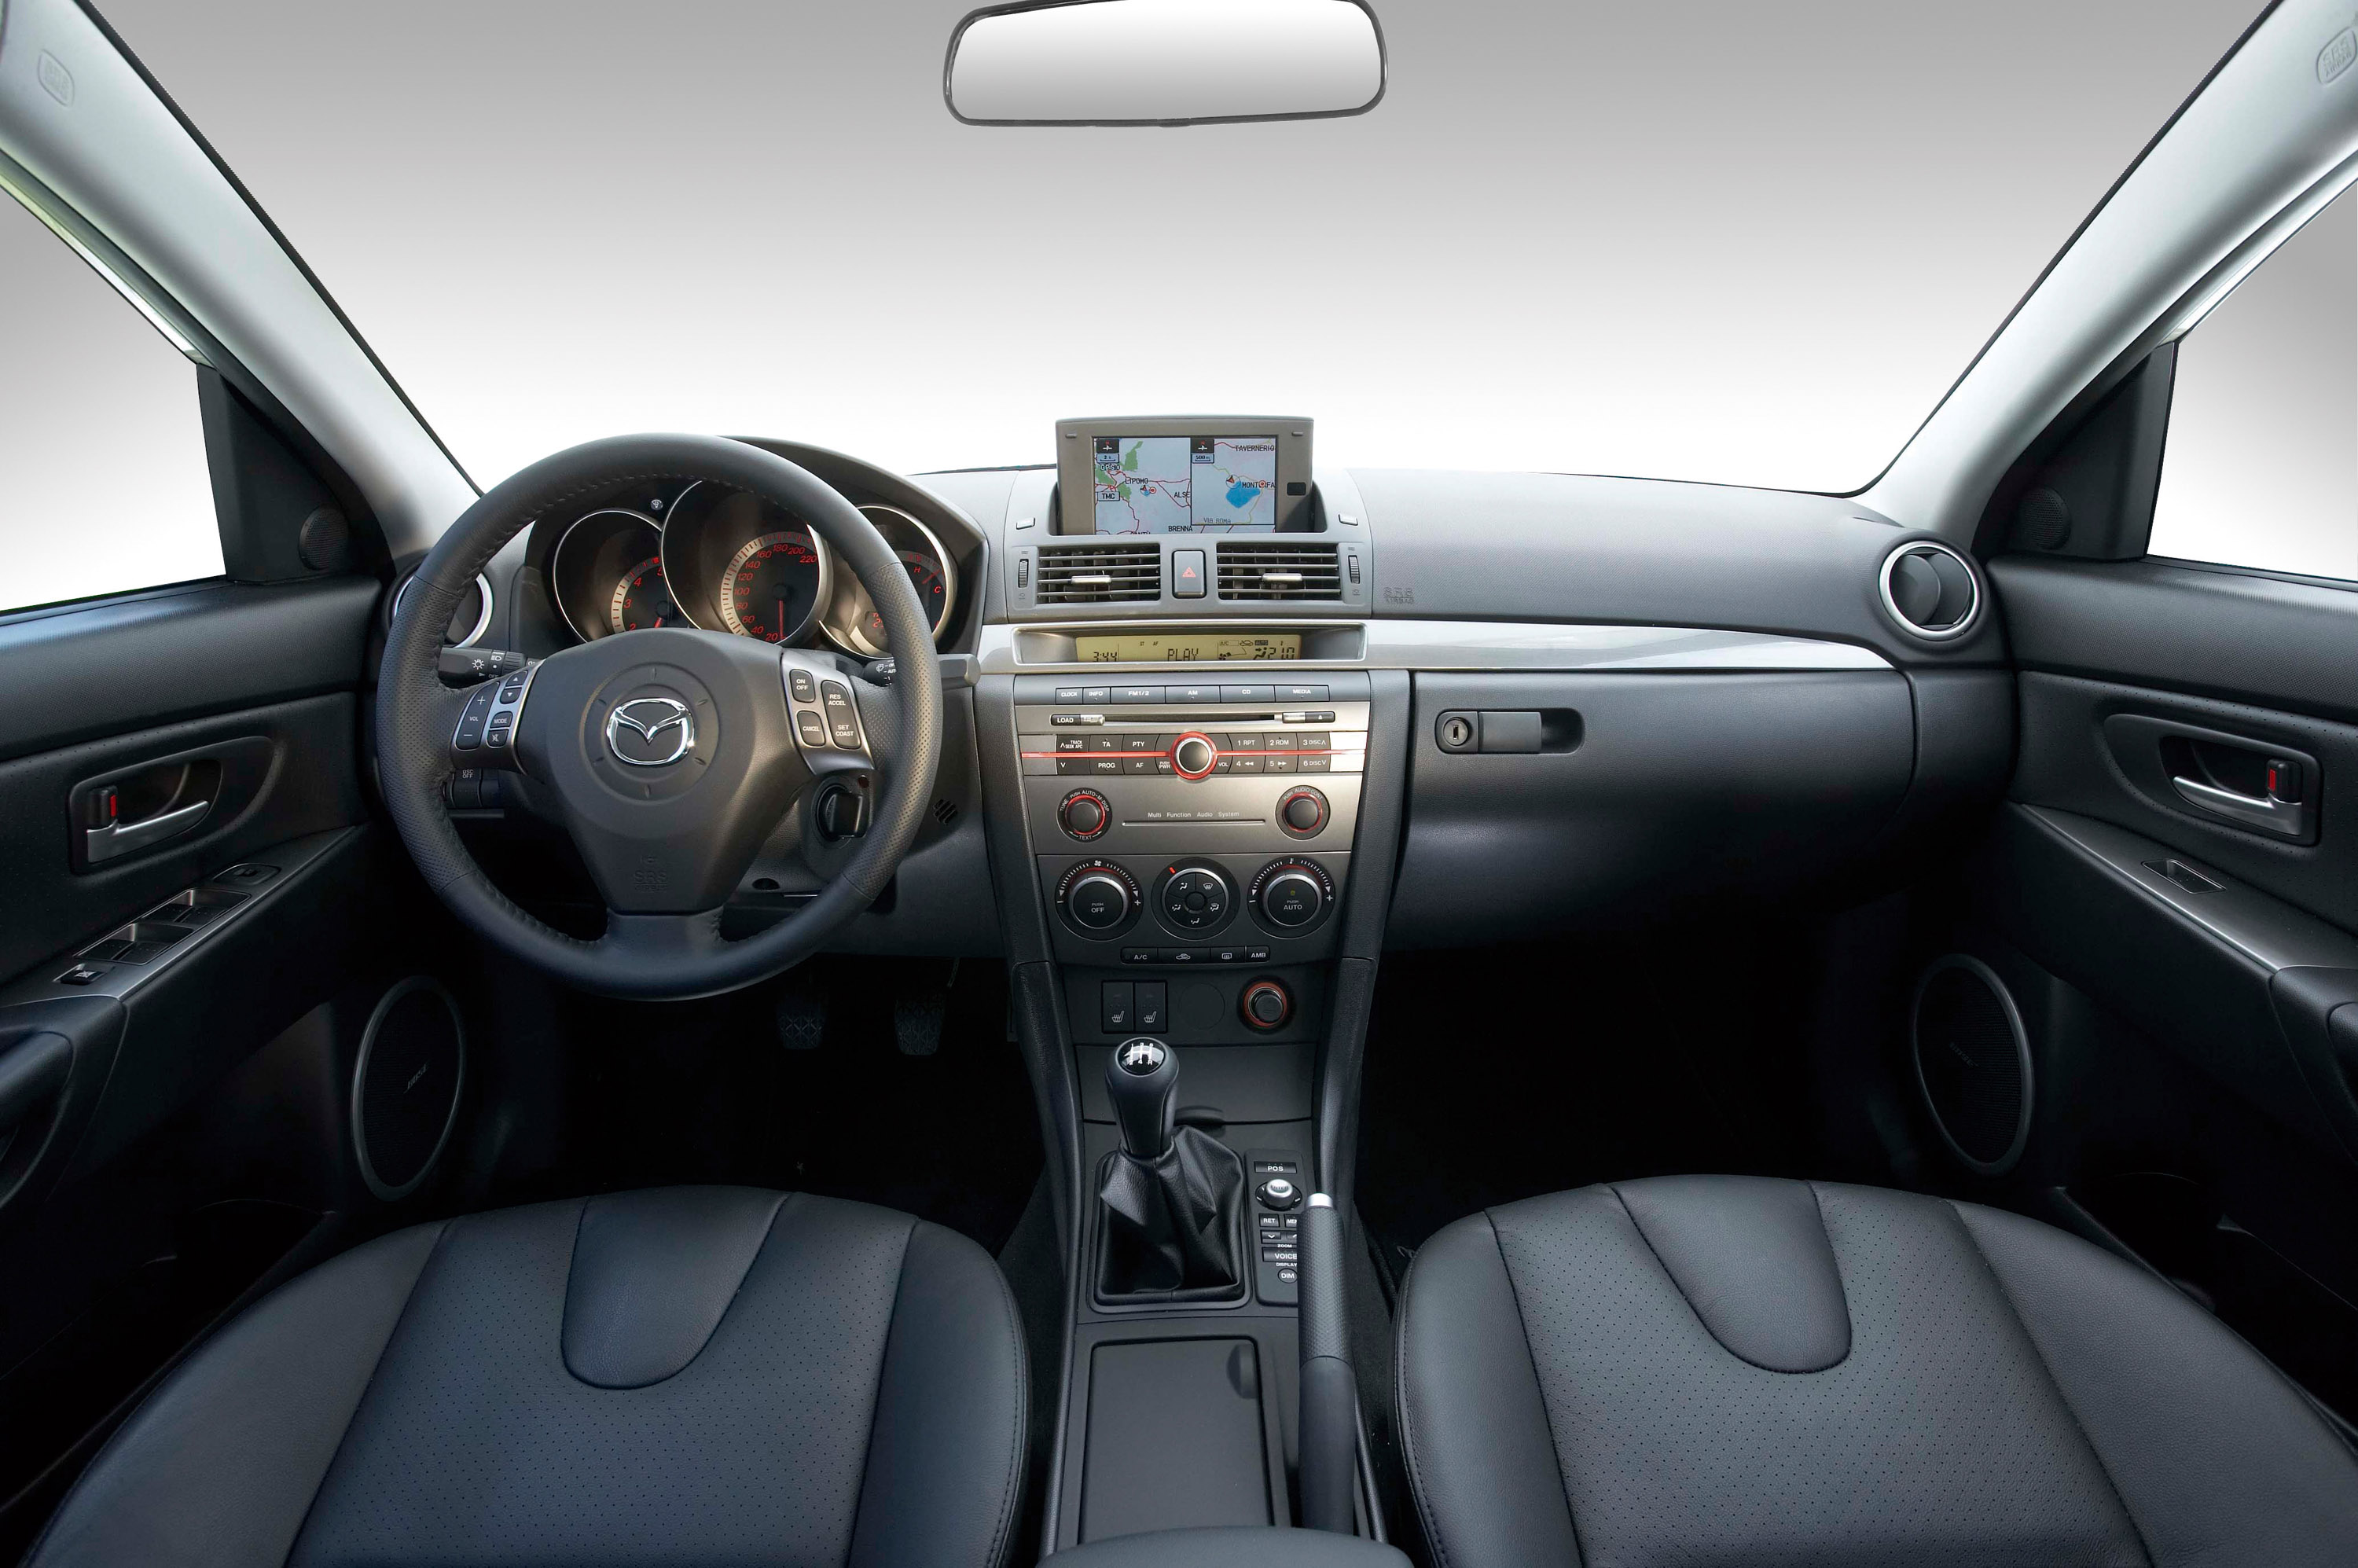 2006 Mazda 3 Facelift Hd Pictures